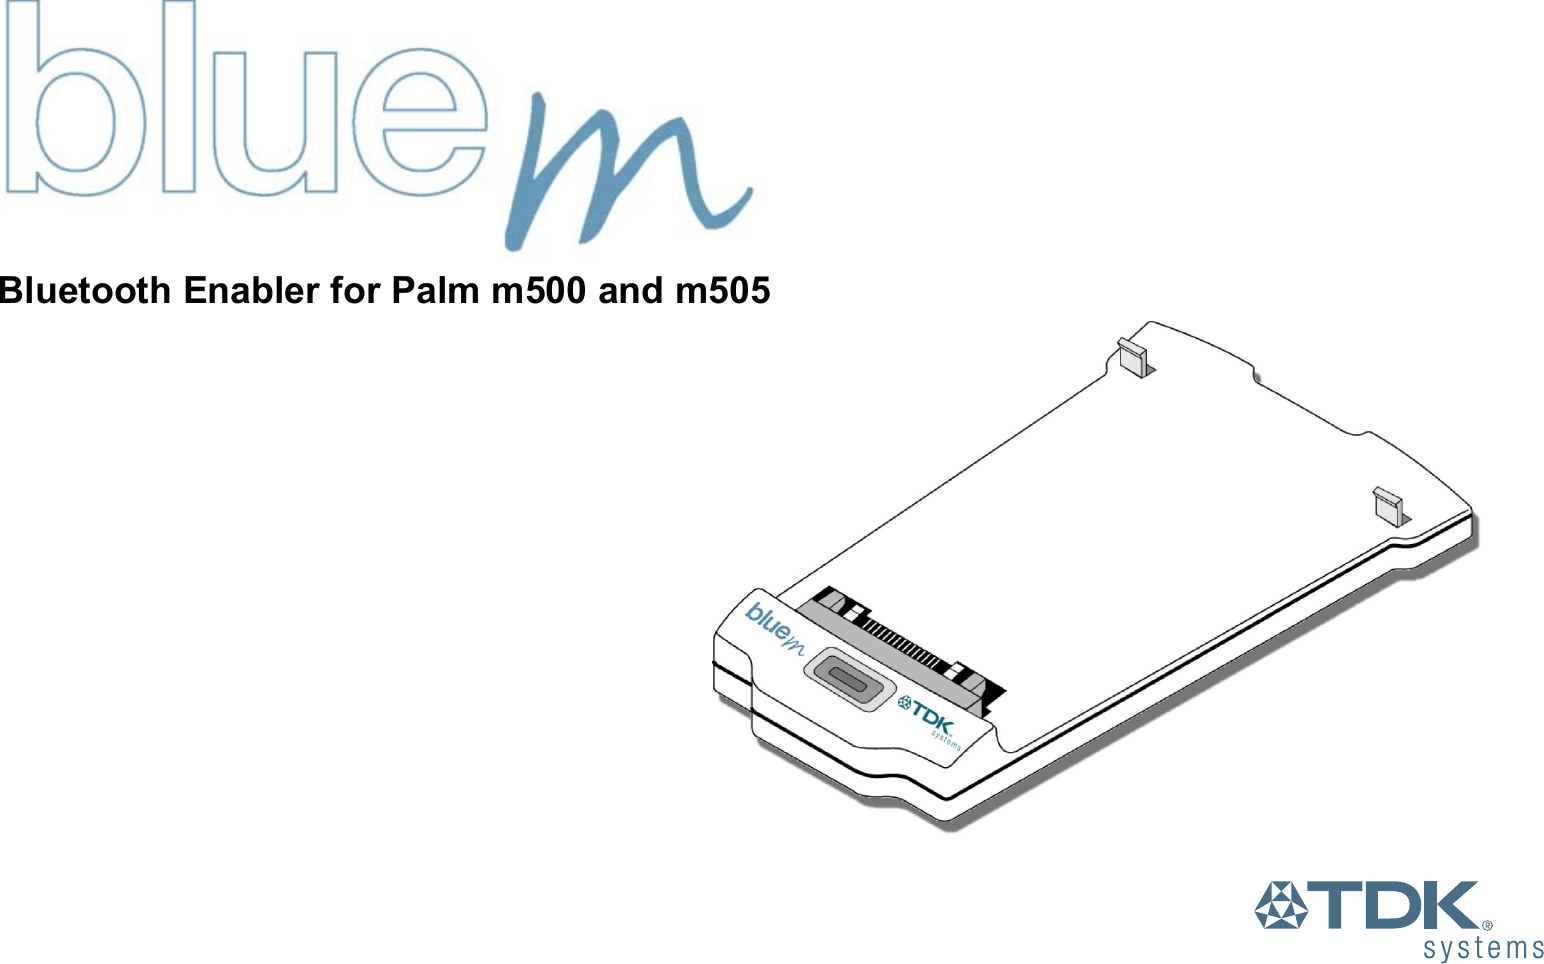 Bluetooth Enabler for Palm m500 and m505